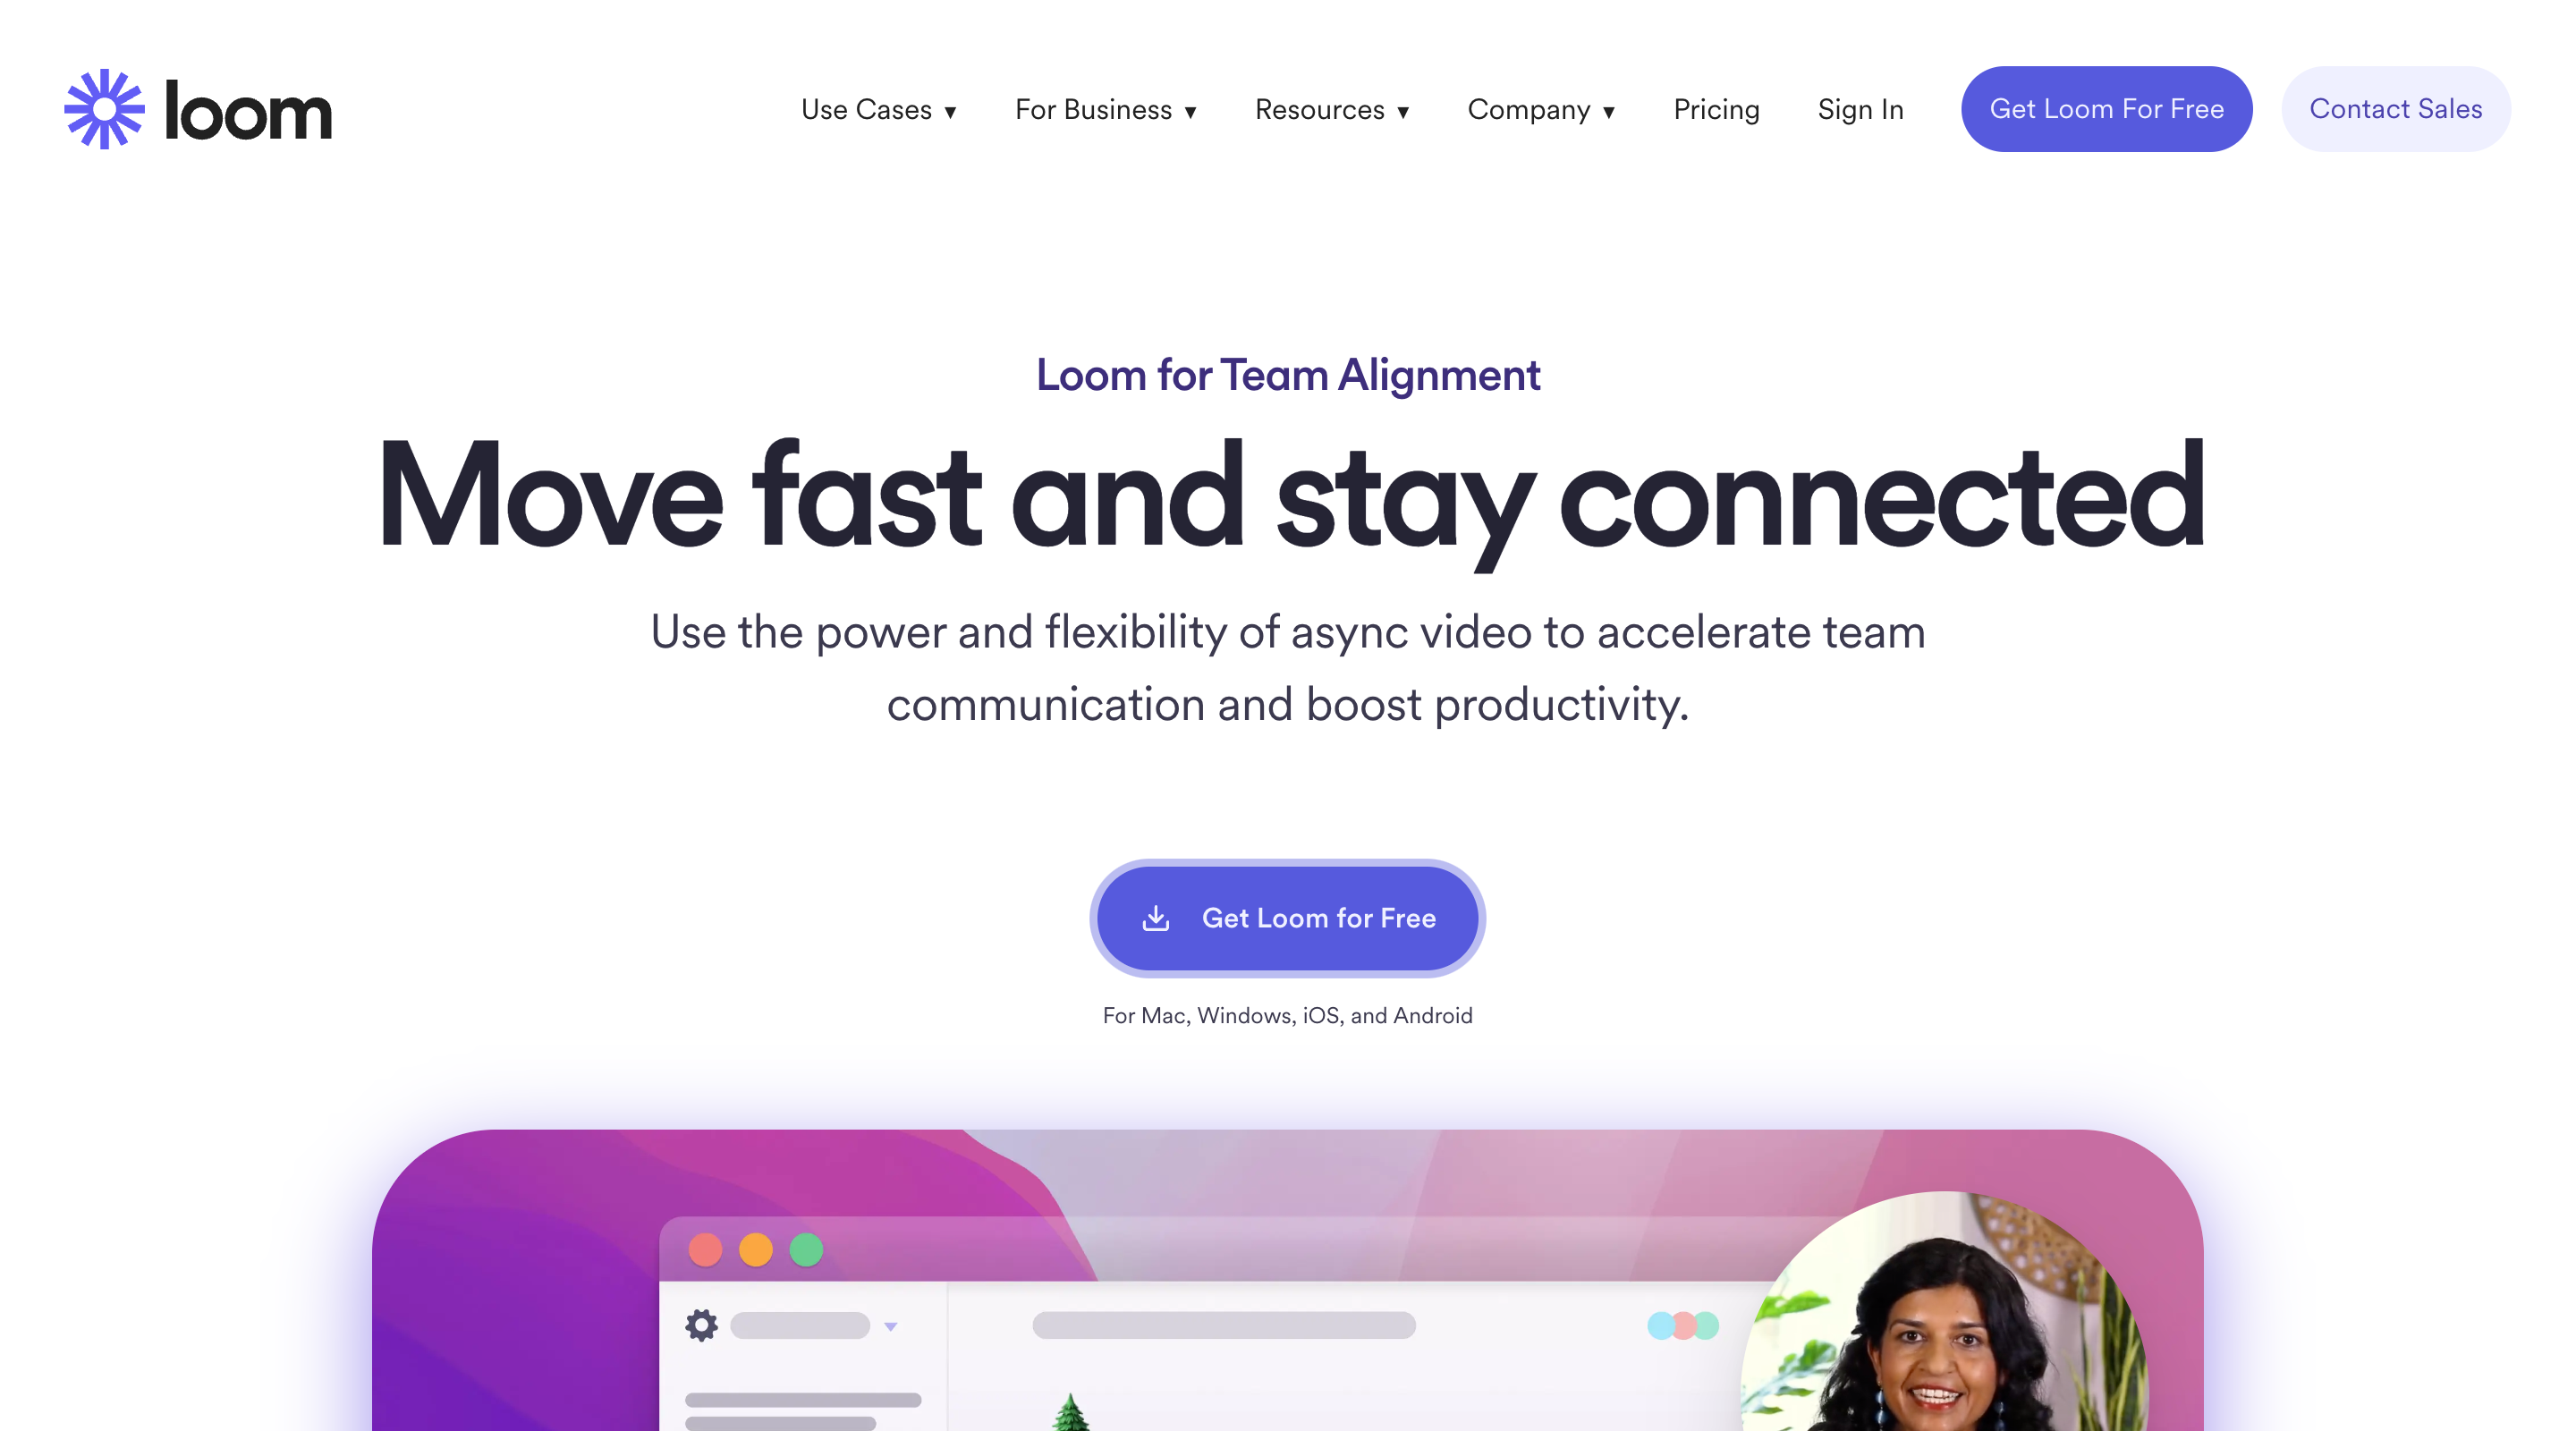 Screenshot of the 'Team Alignment' page on the Loom website. The header contains the Loom logo, main site navigation, and primary calls-to-action. In the hero section a large heading and introduction paragraph are followed by a 'Get Loom for Free' button.